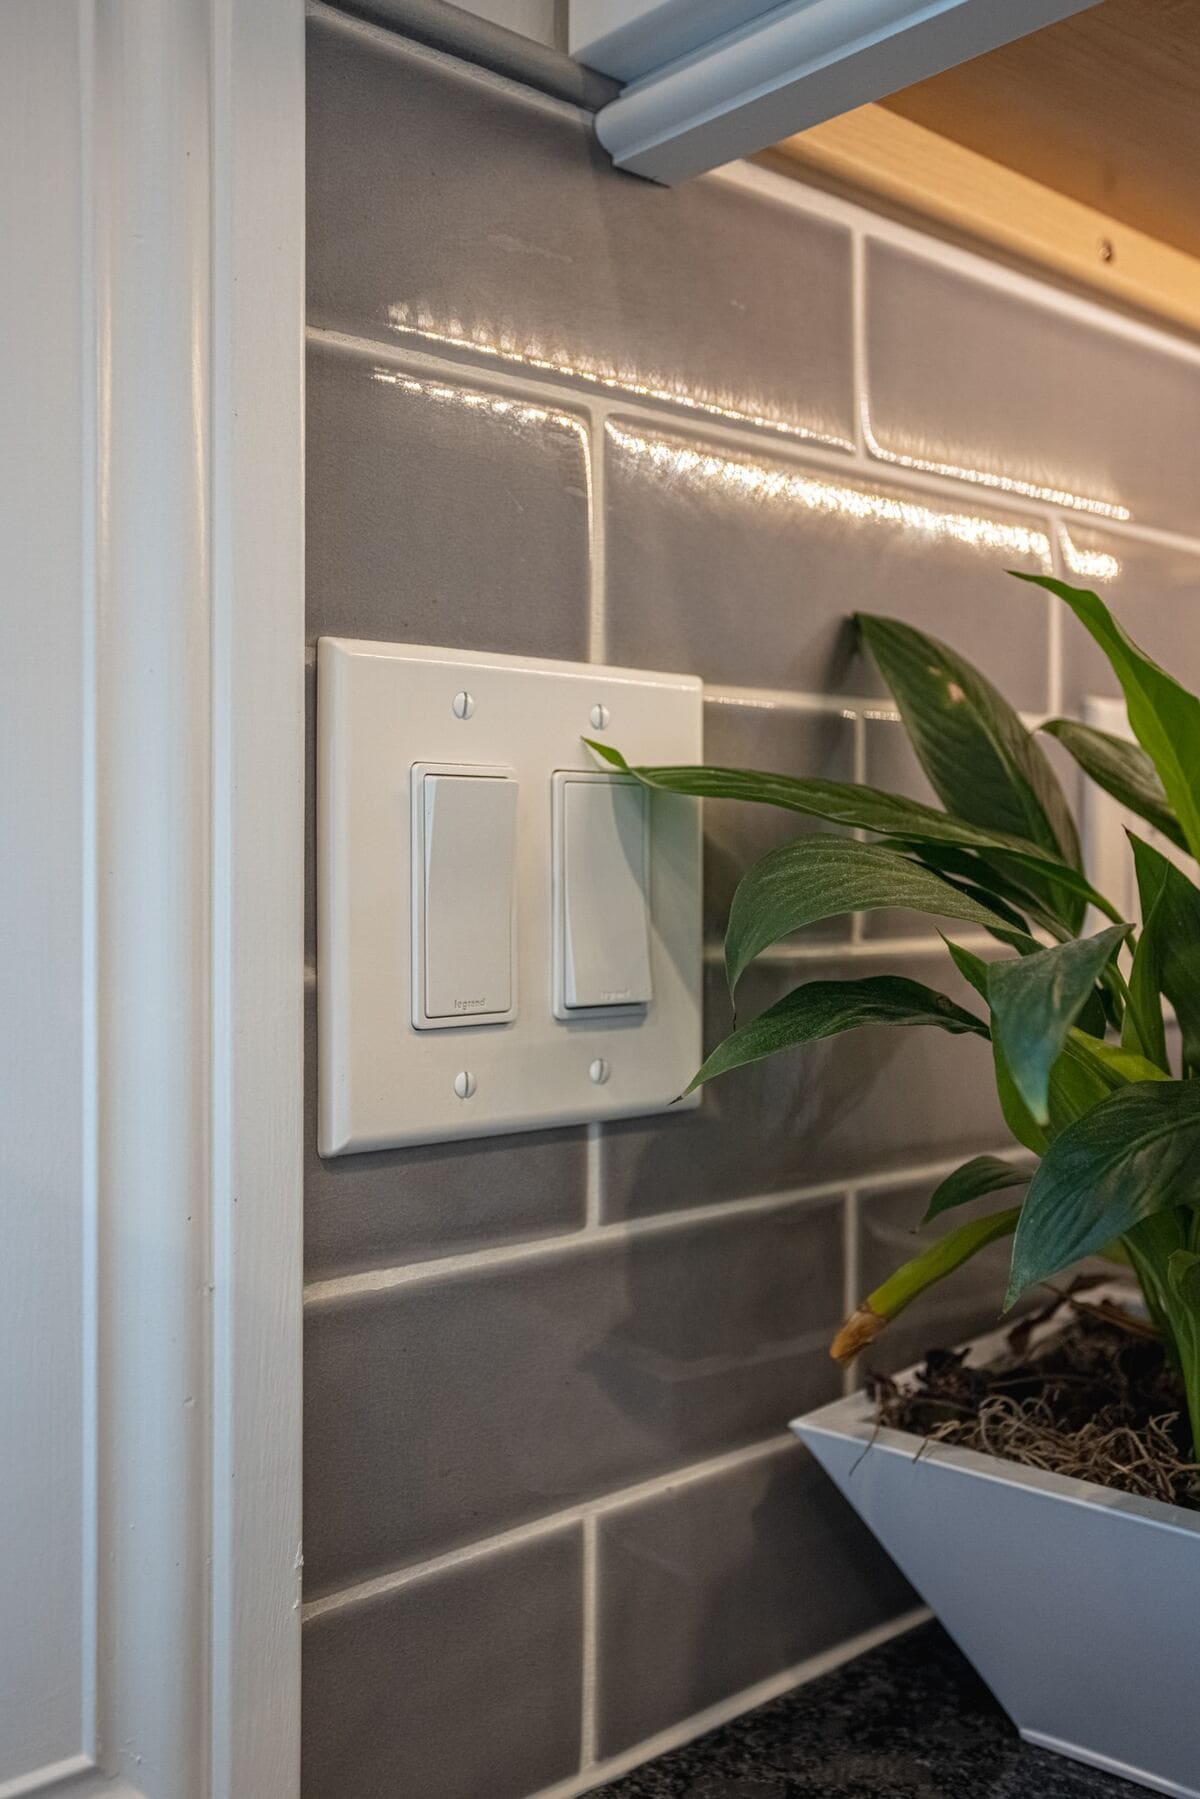 Light switch on gray subway tile in kitchen